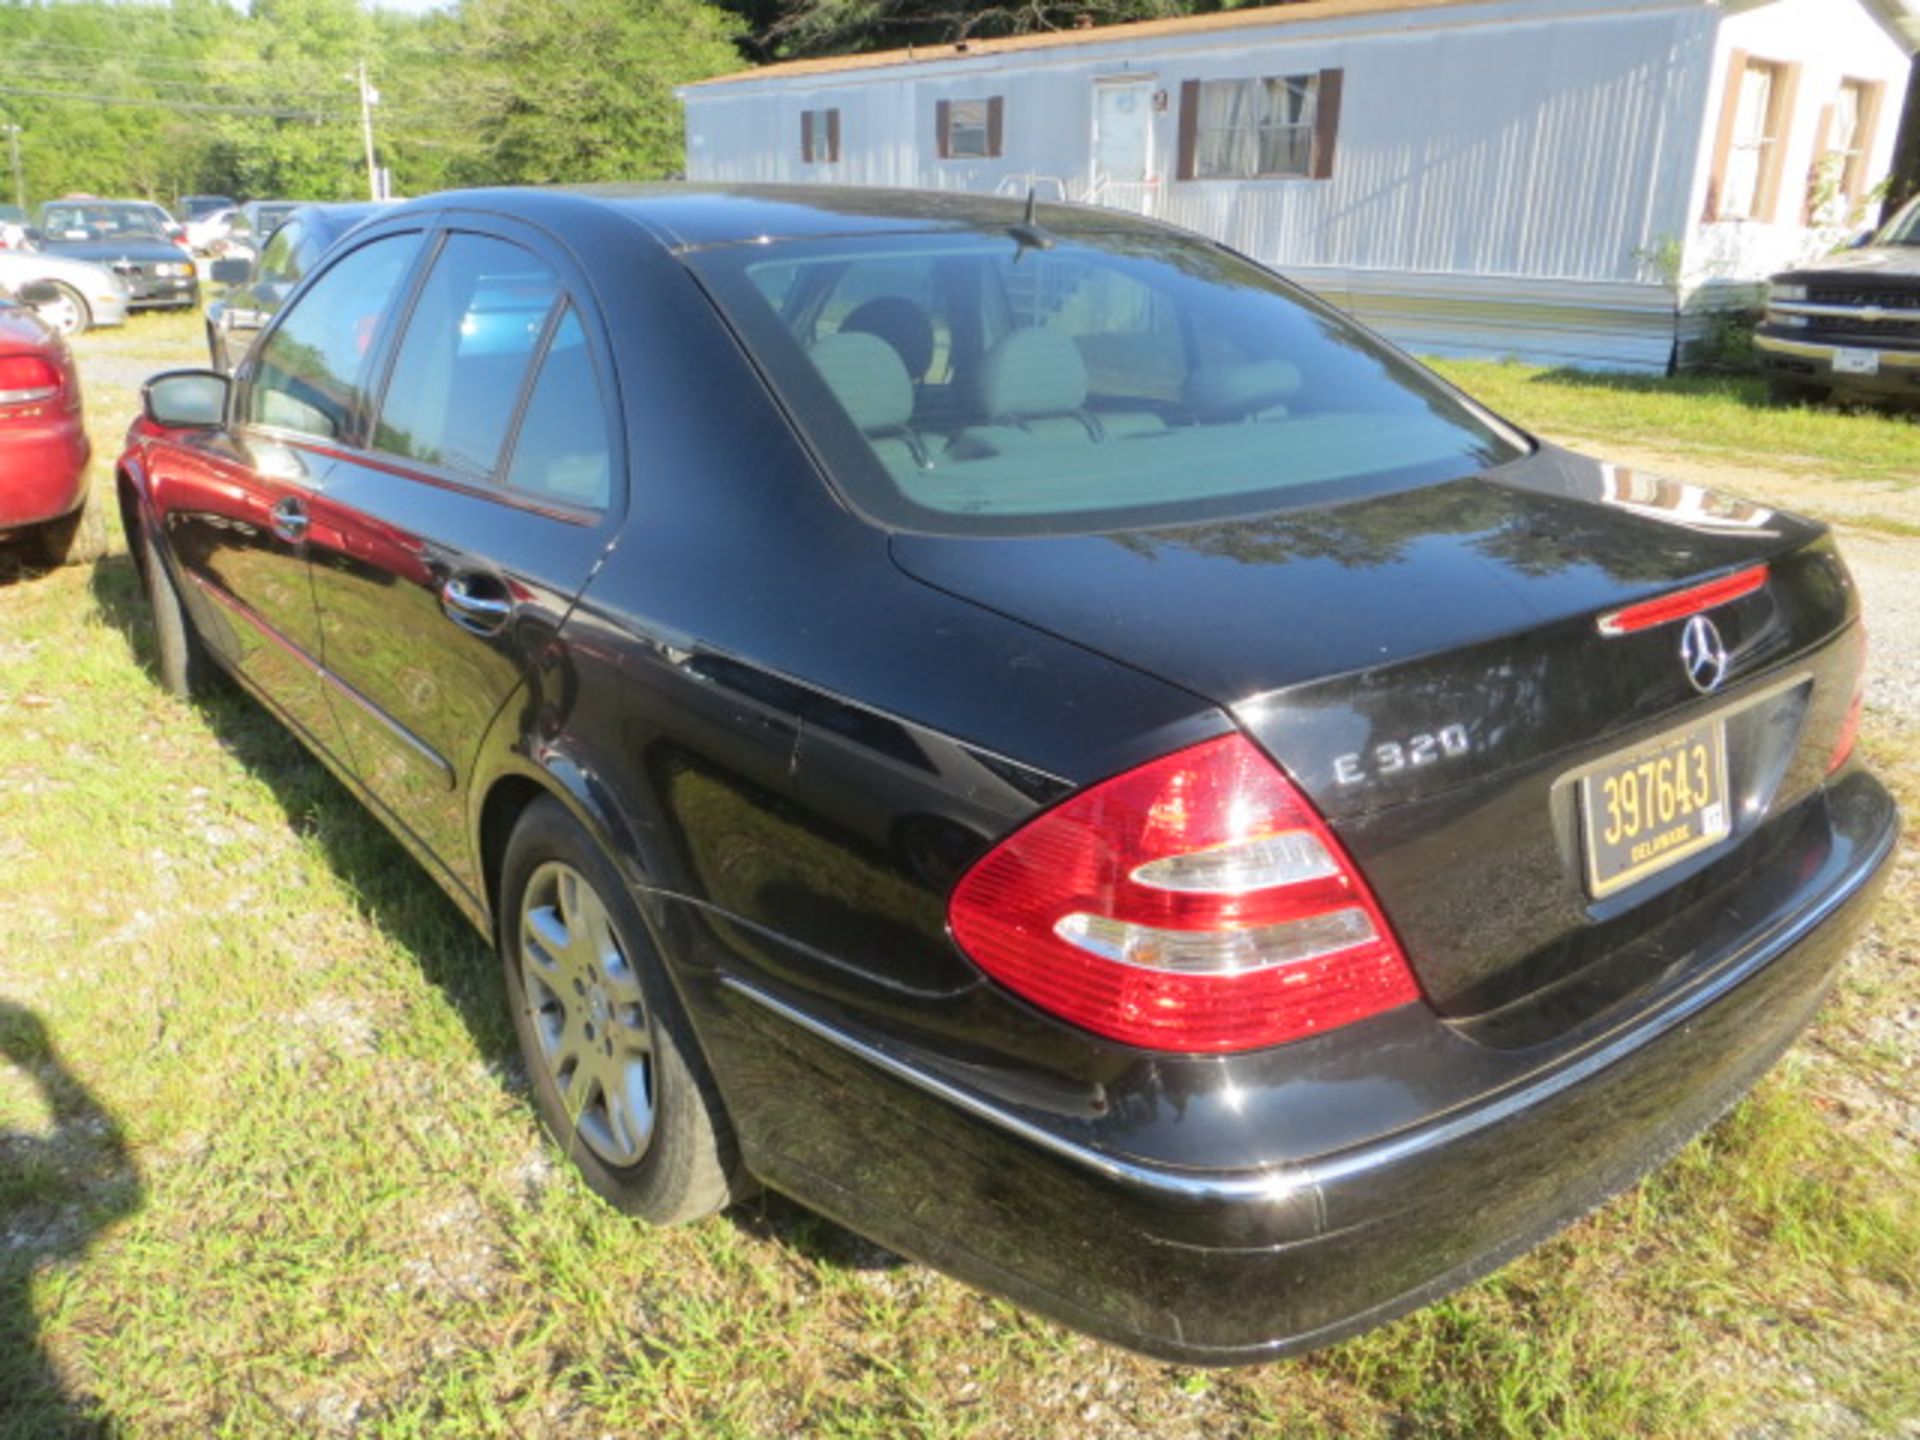 2003 MERCEDES E320 148000 MILES,VIN WDBUF65J43A159928, SOLD WITH GOOD TRANSFERABLE TITLE, ALL VEHICL - Image 4 of 4